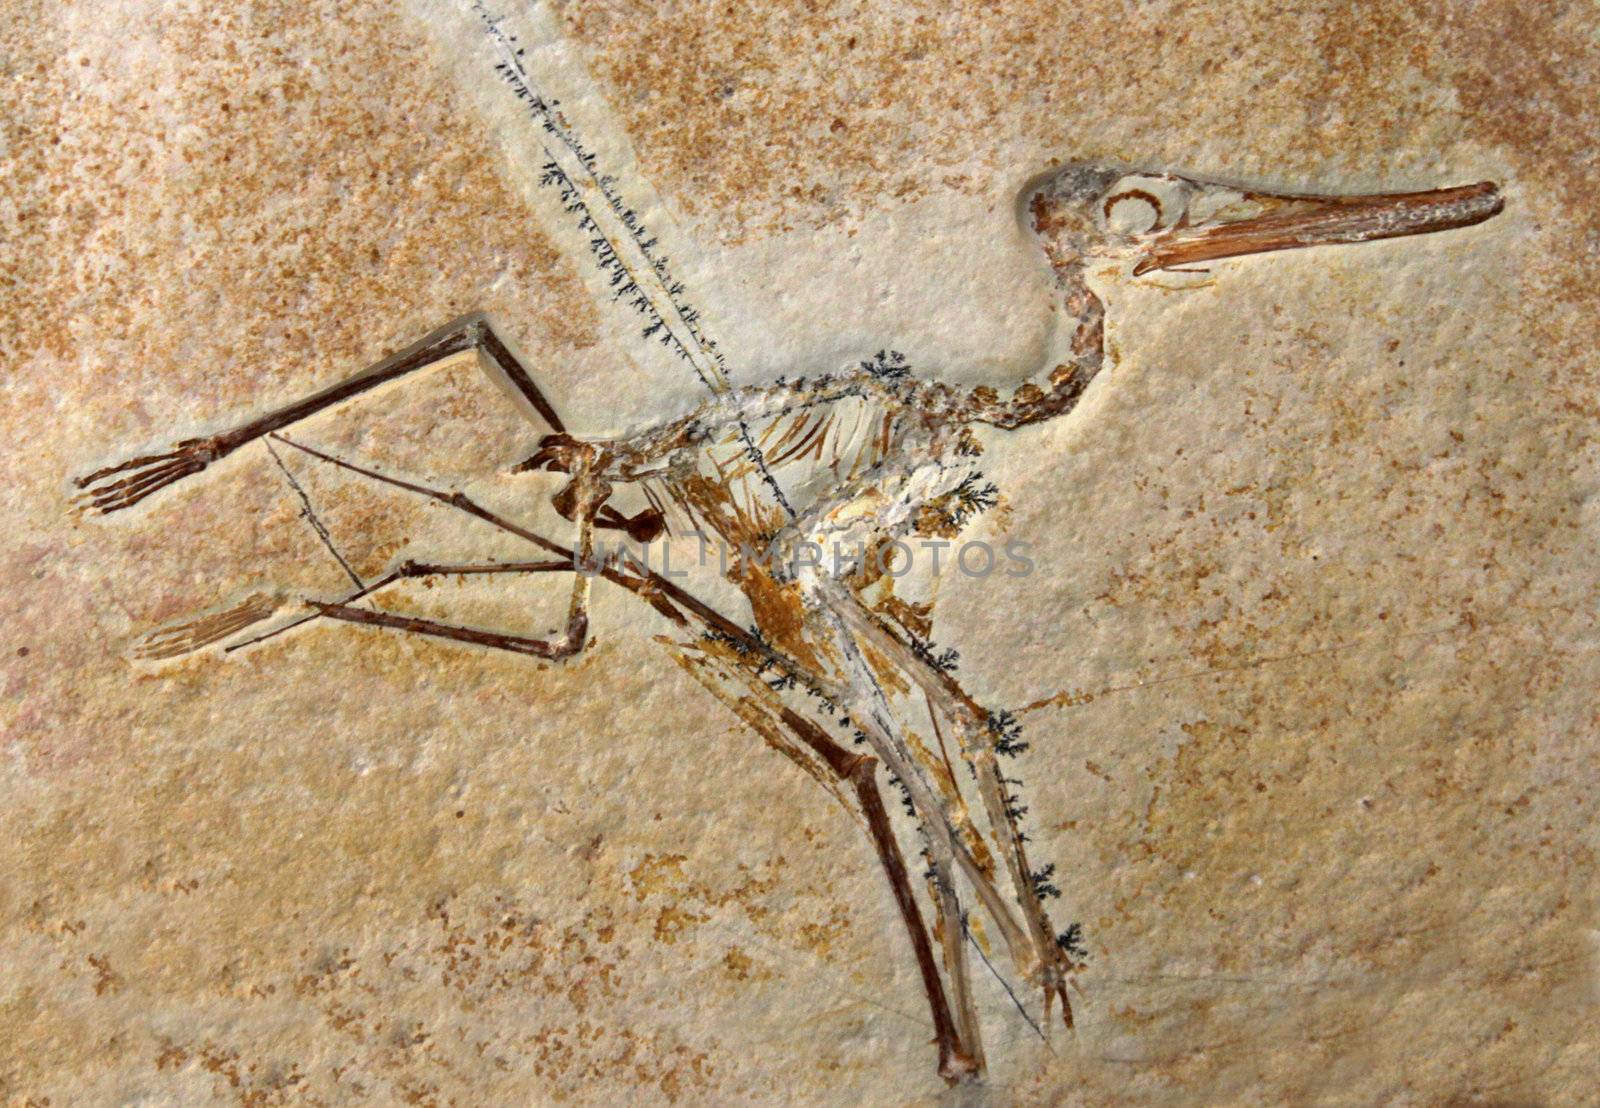 Pterodactylus Elegans Fossil by ca2hill